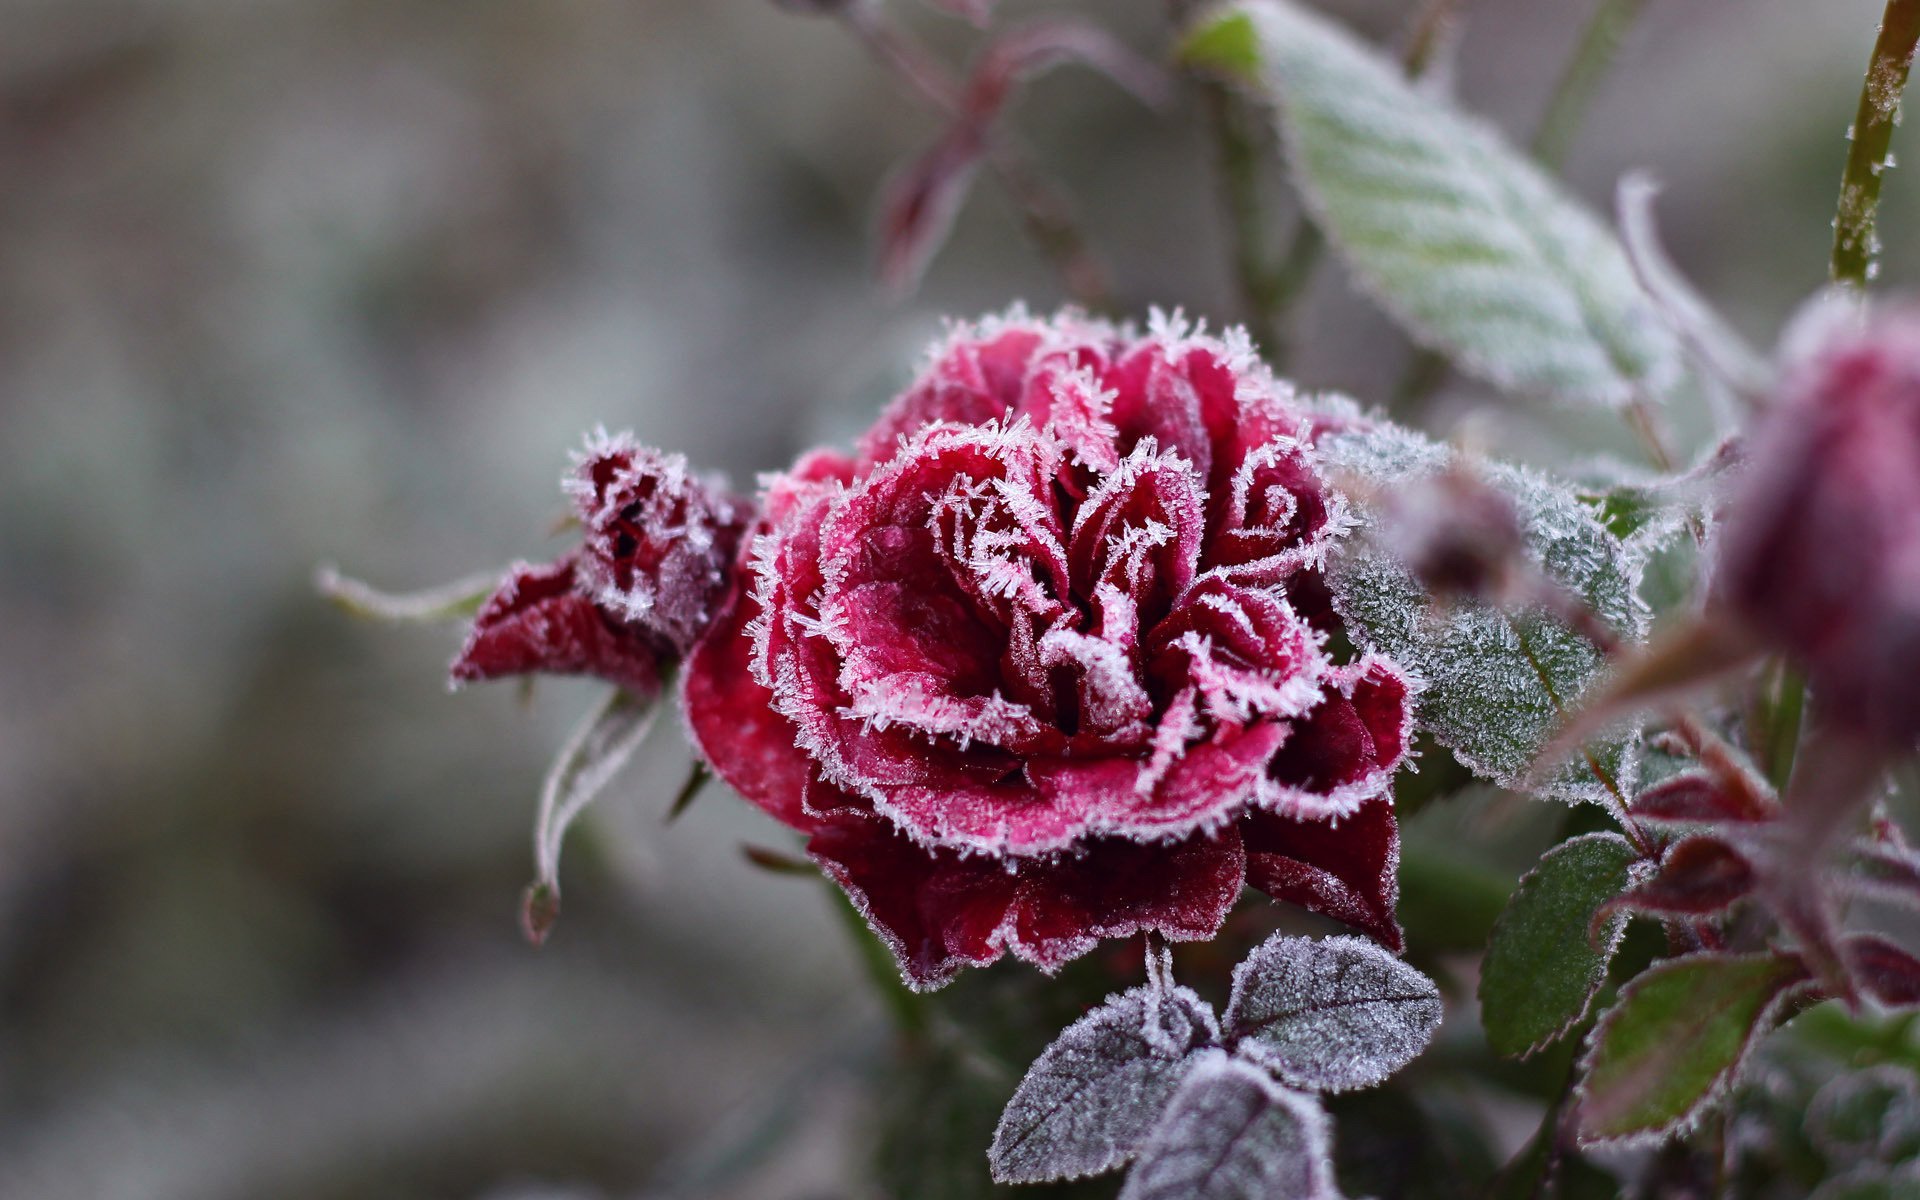 Frozen red rose with petals covered with frost crystals